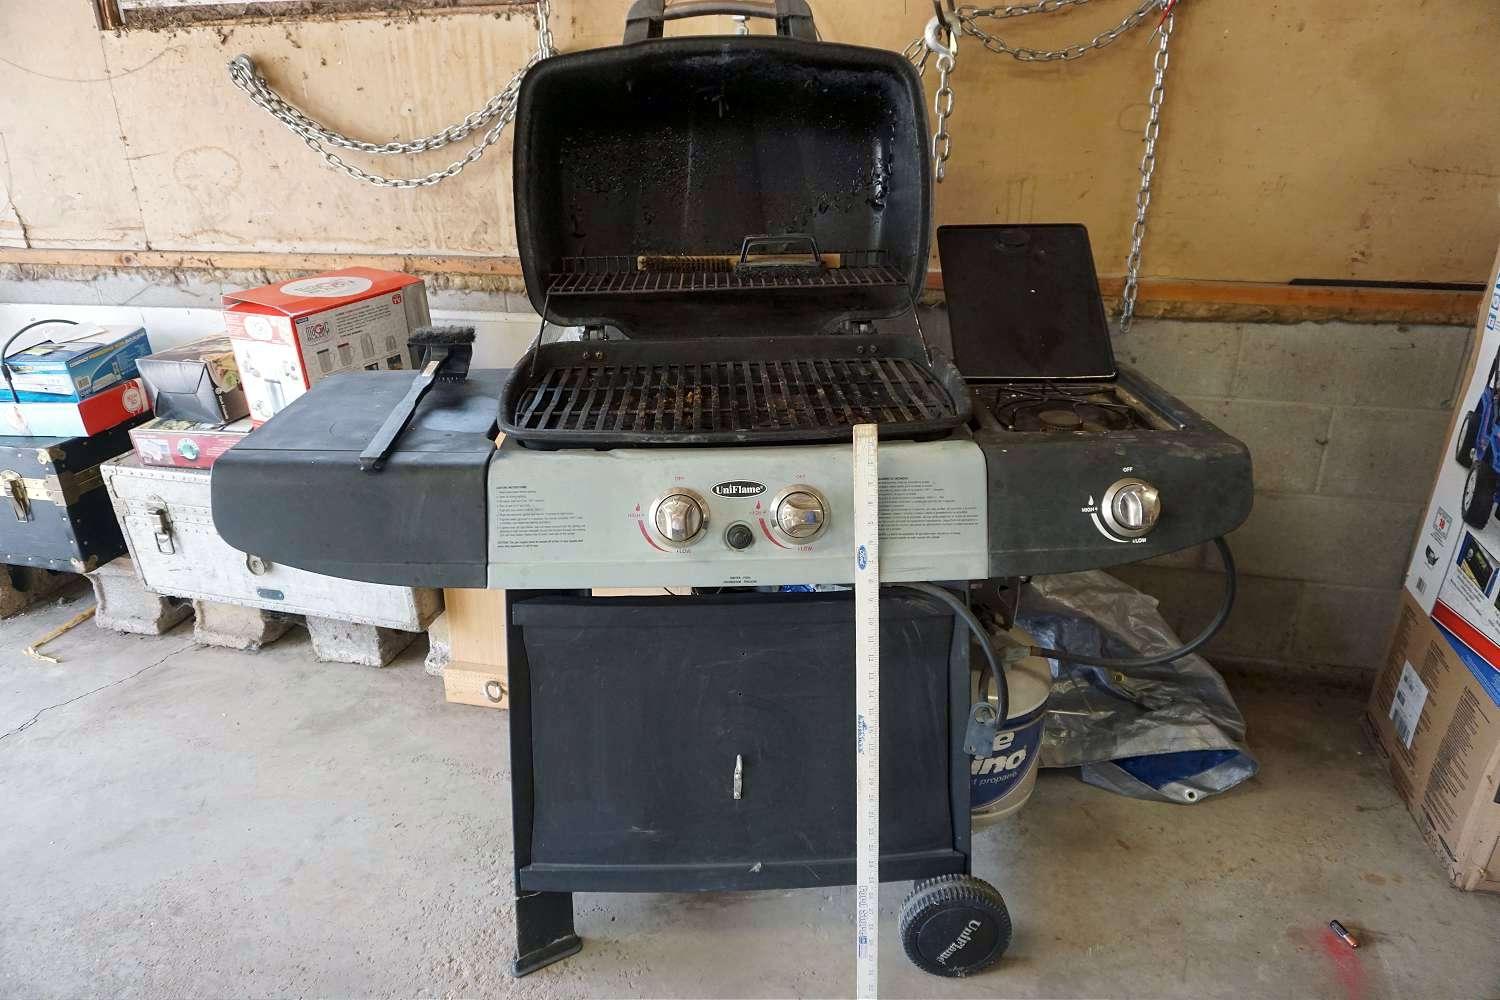 Uniflame grill